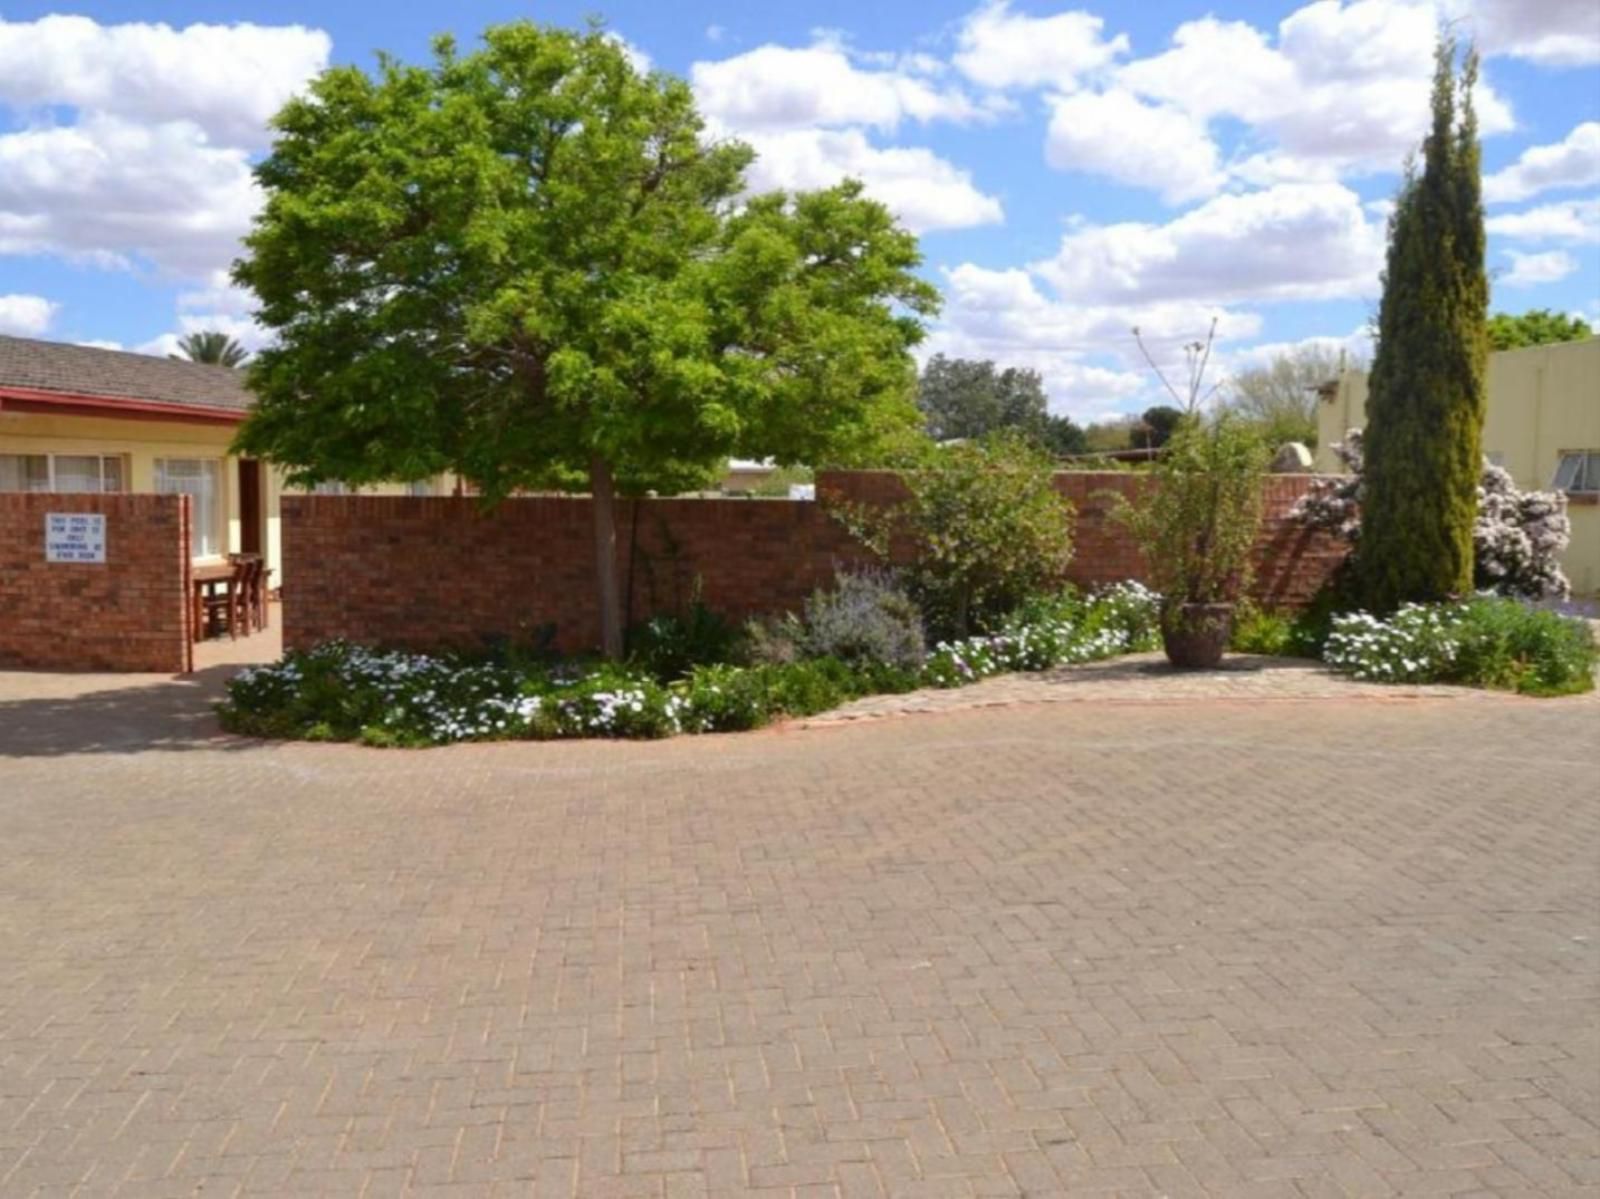 Hadida Guest House Kimberley Northern Cape South Africa House, Building, Architecture, Brick Texture, Texture, Garden, Nature, Plant